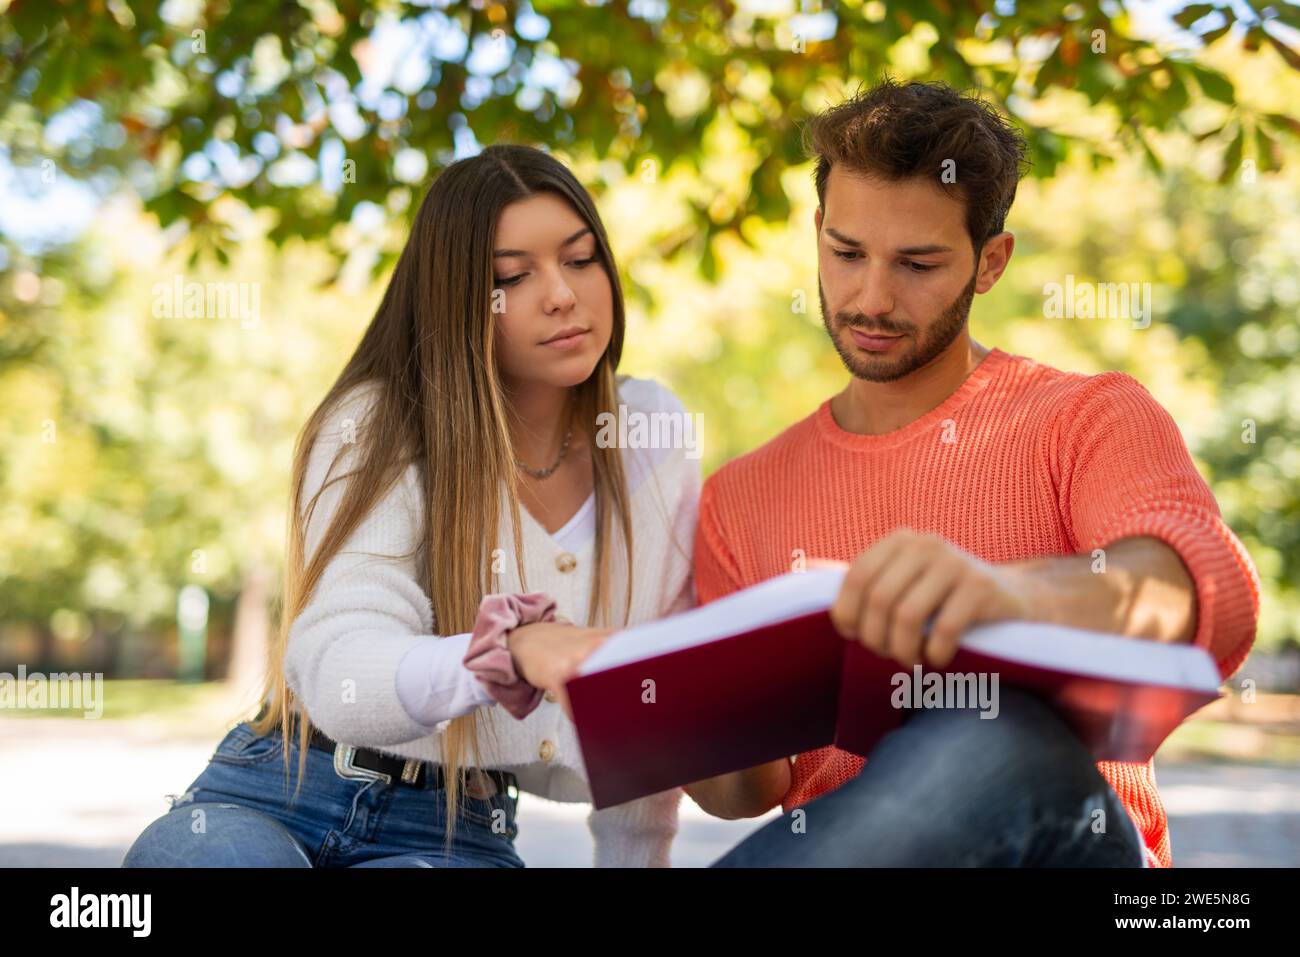 Male and female students studying together in a park Stock Photo